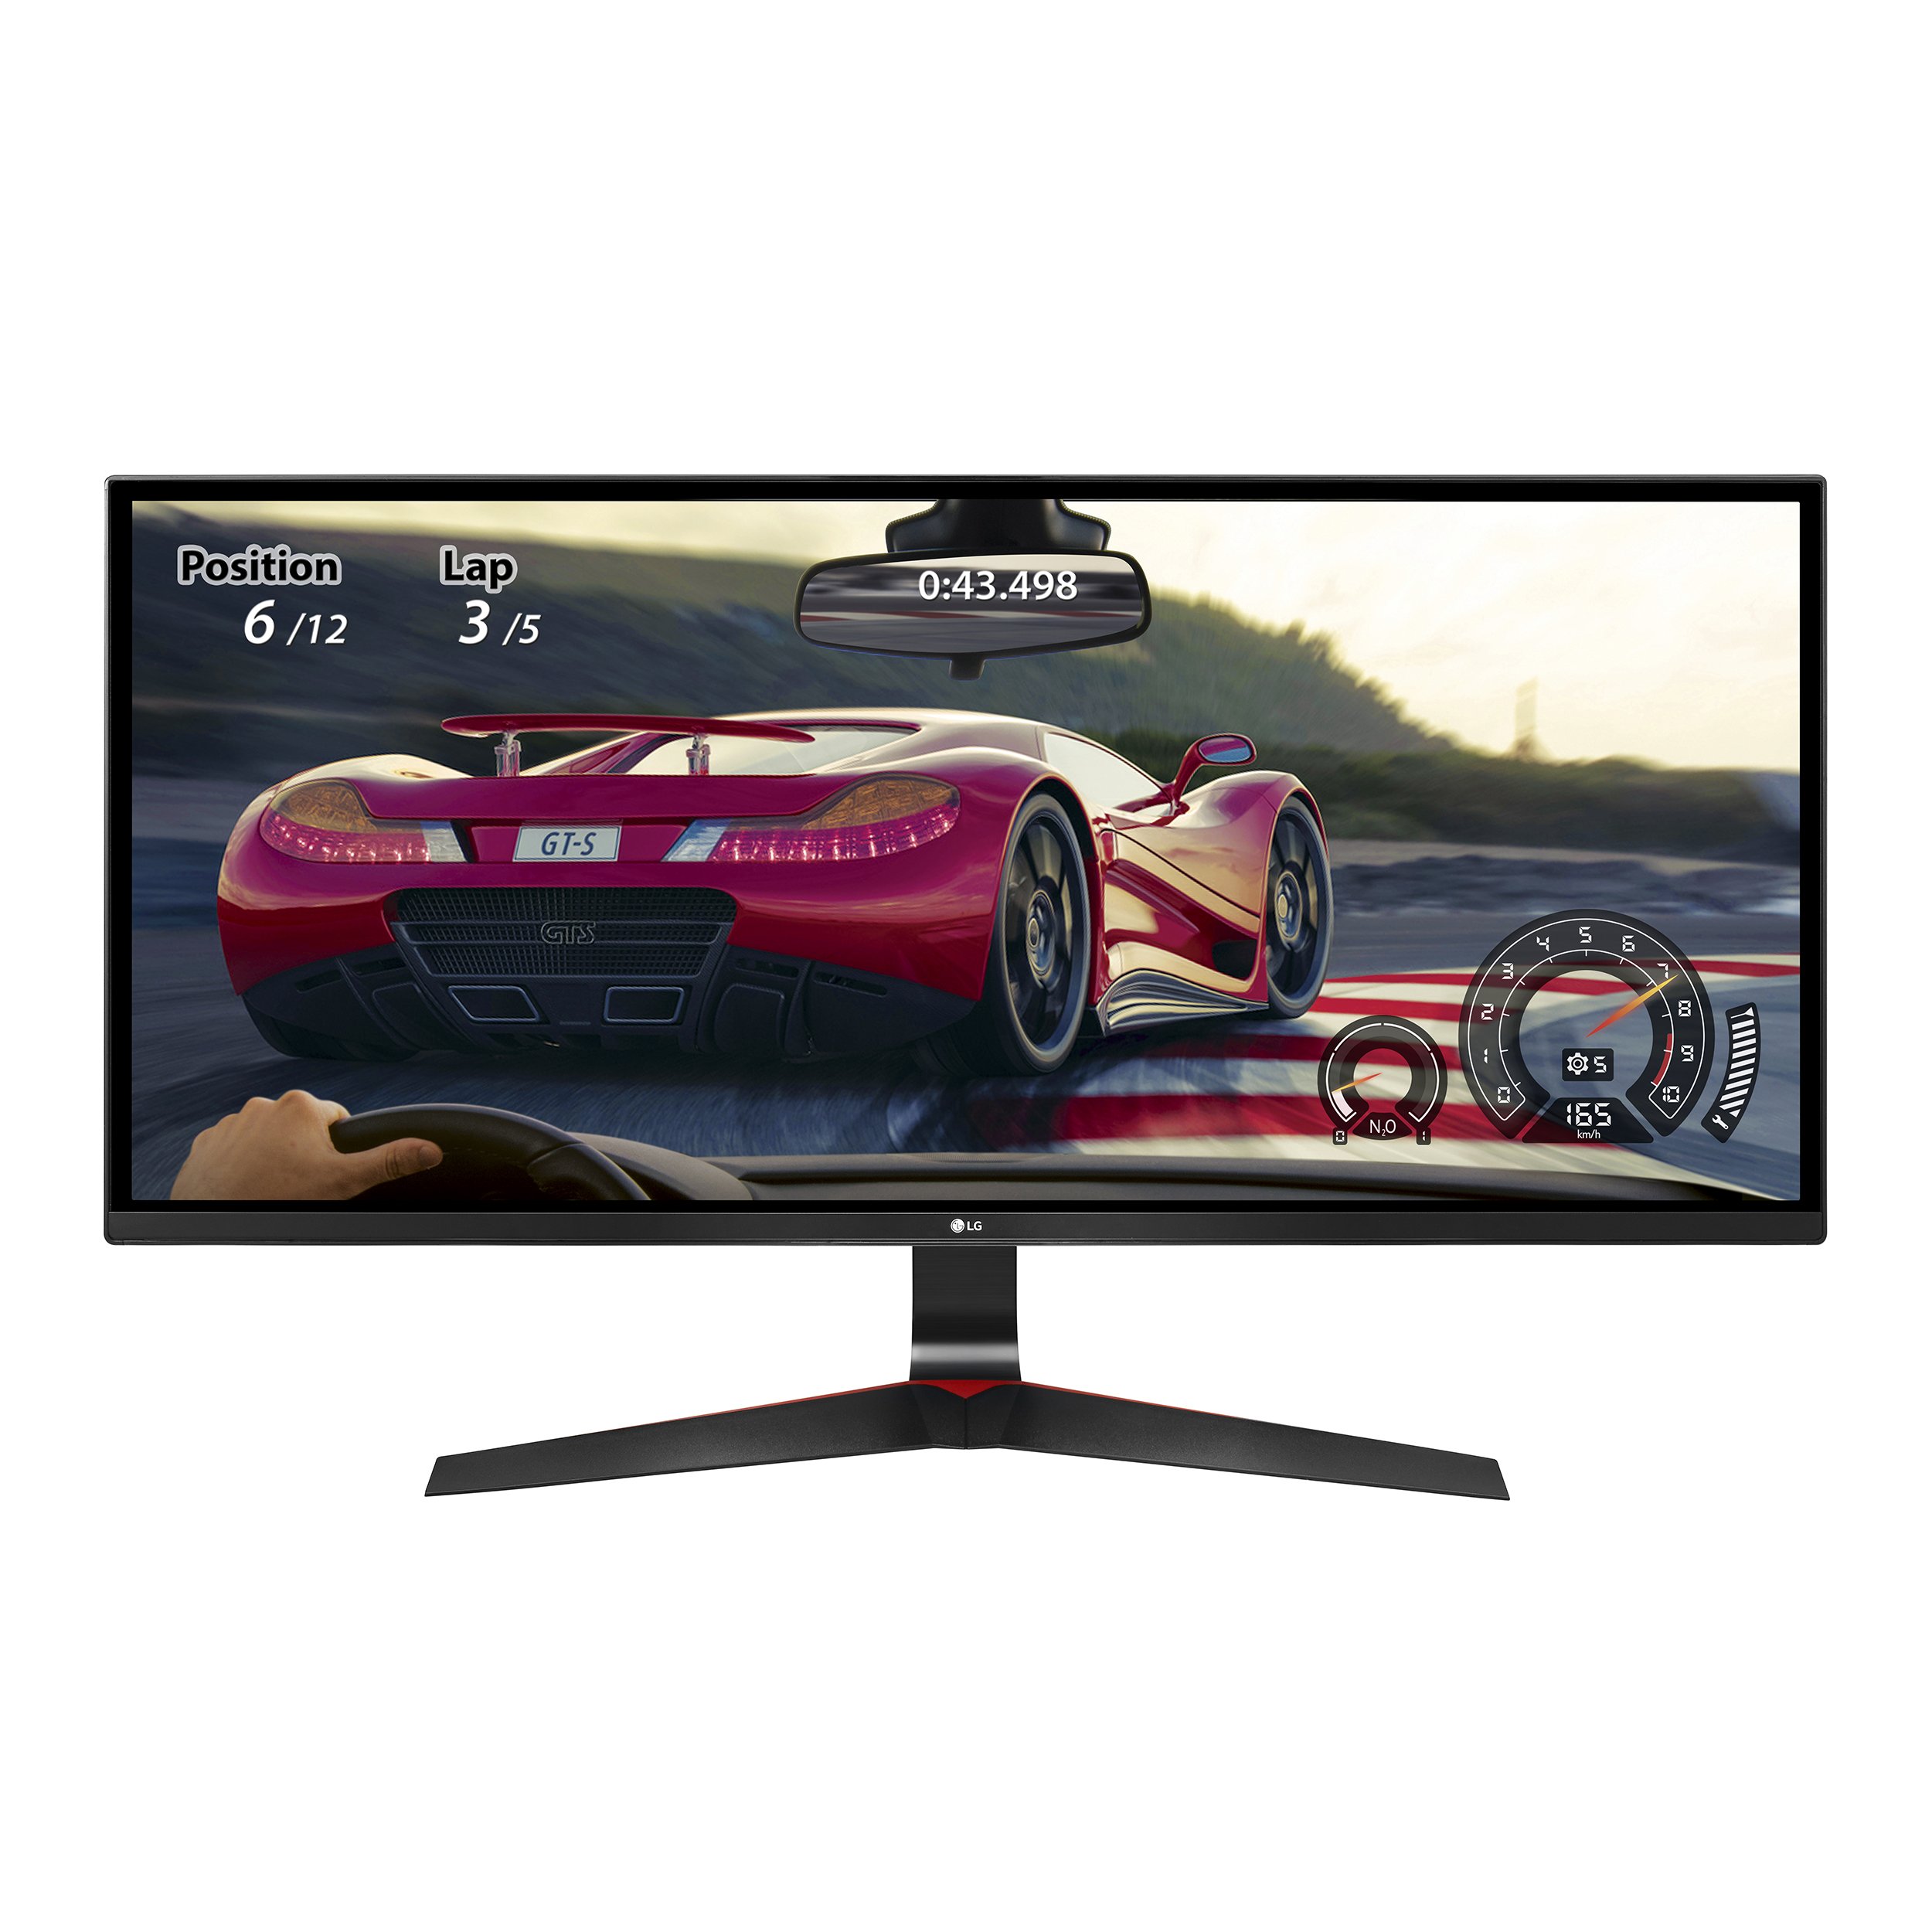 Book Cover LG 34UM69G-B 34-Inch 21:9 UltraWide IPS Monitor with 1ms Motion Blur Reduction and FreeSync,Black